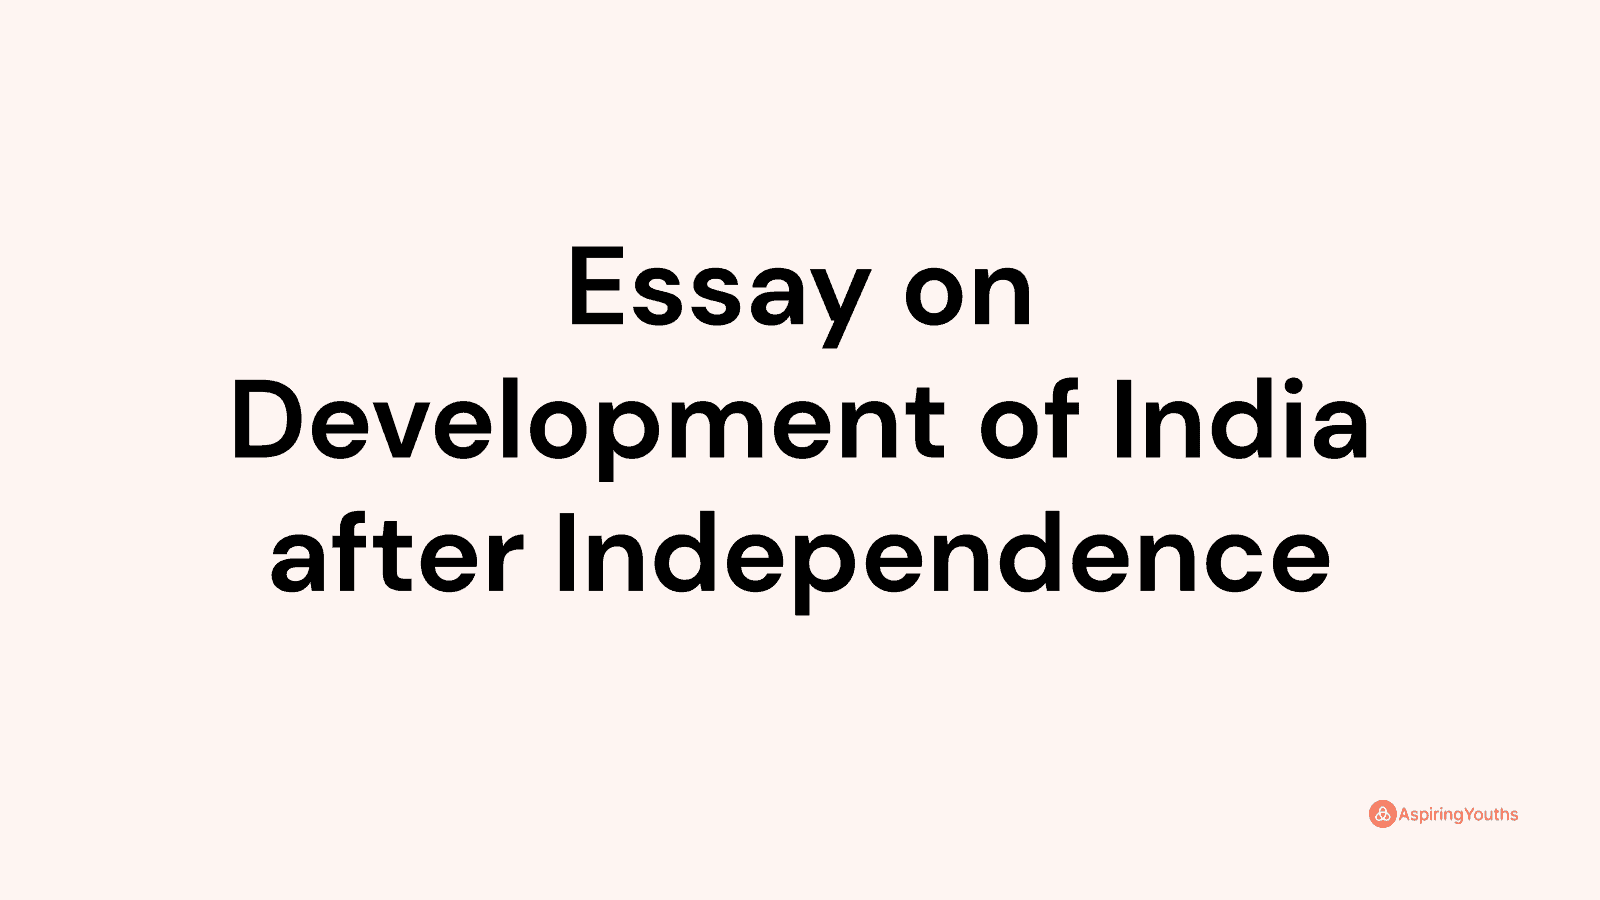 essay on india's development after independence